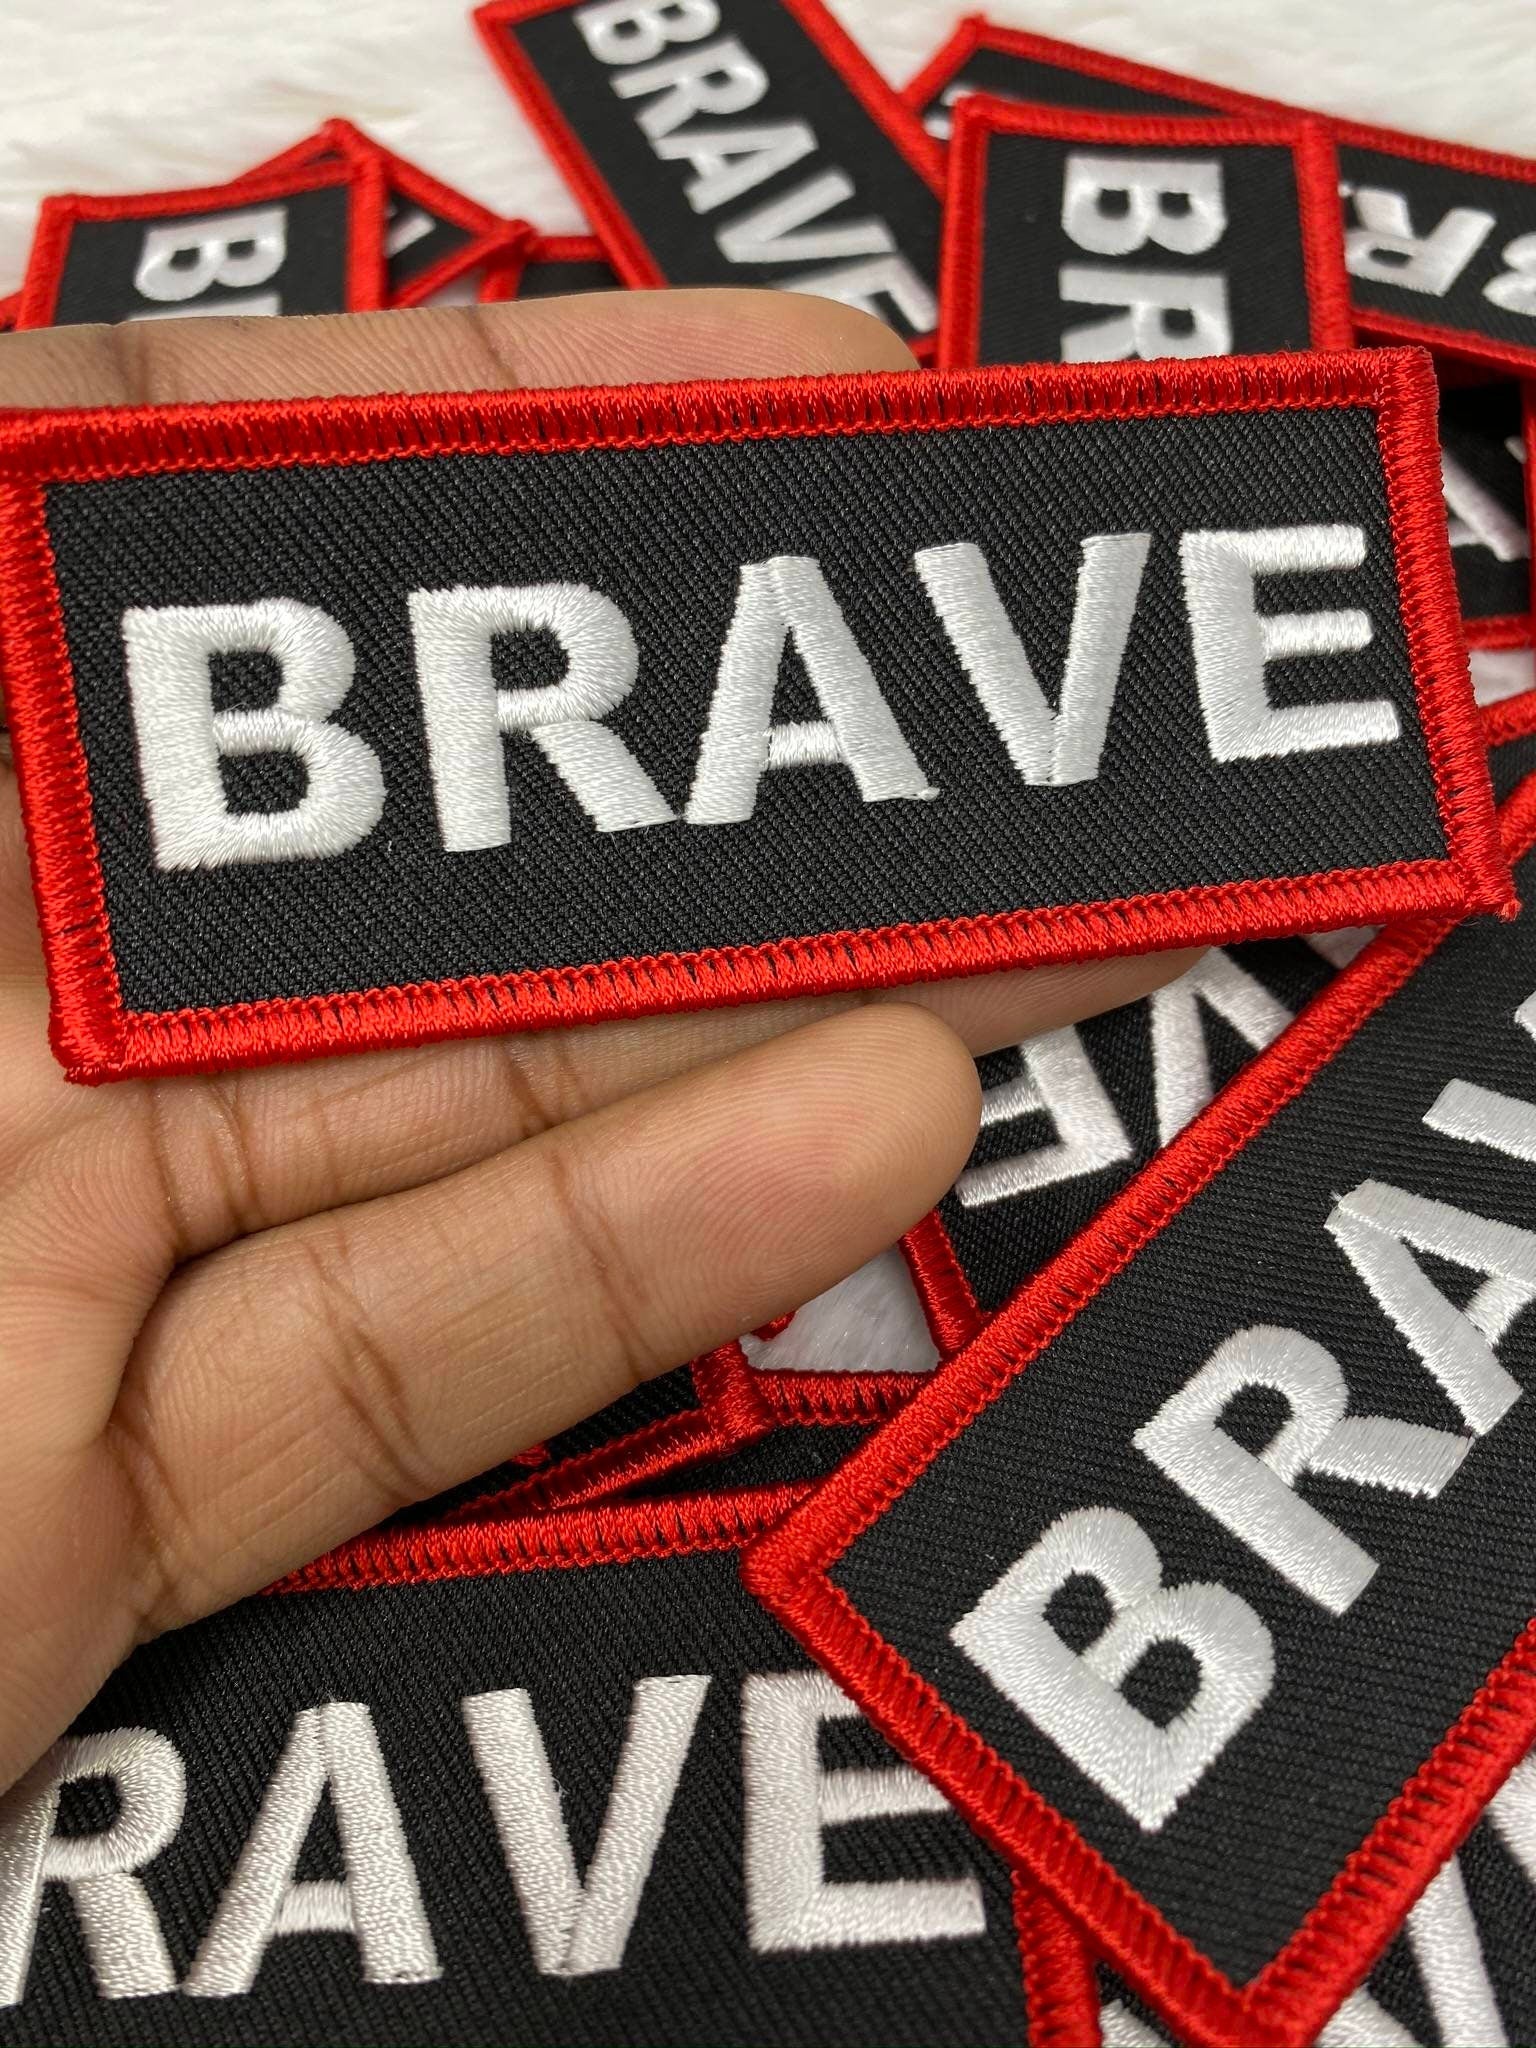 Popular Patch, Red, Black, & White|"Brave" Iron-on Embroidered Patch; Statement Patch, Patches for Men, Size 3" x 1.75", Small Jacket Patch